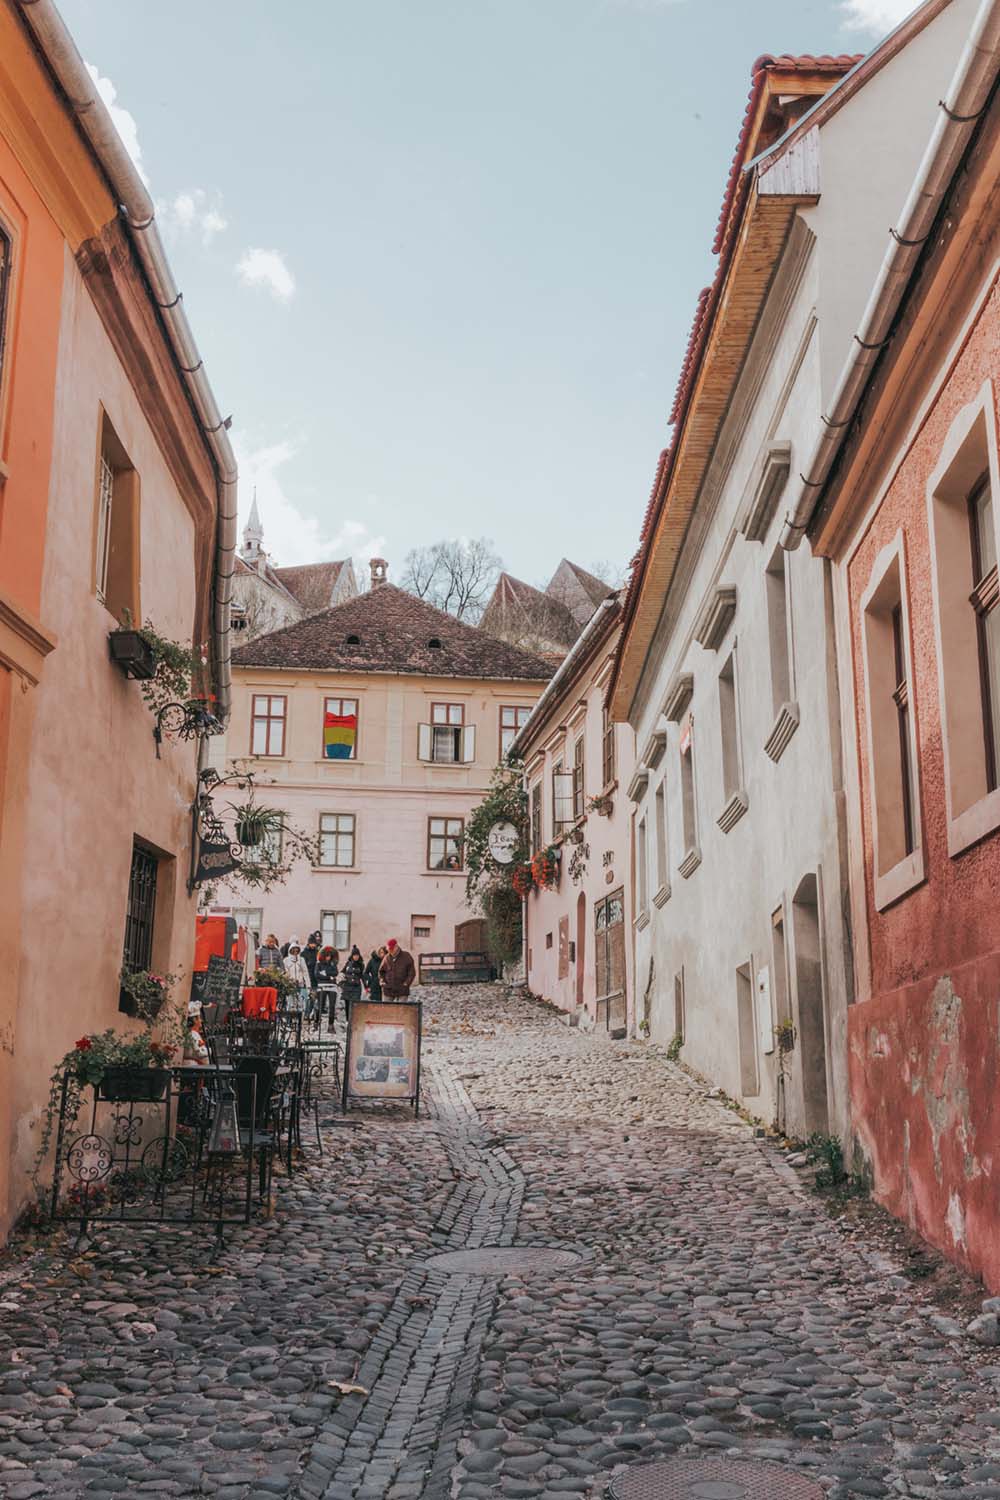 Sighisoara Transylvania - Best Cities To Visit On a Romania Road Trip Itinerary